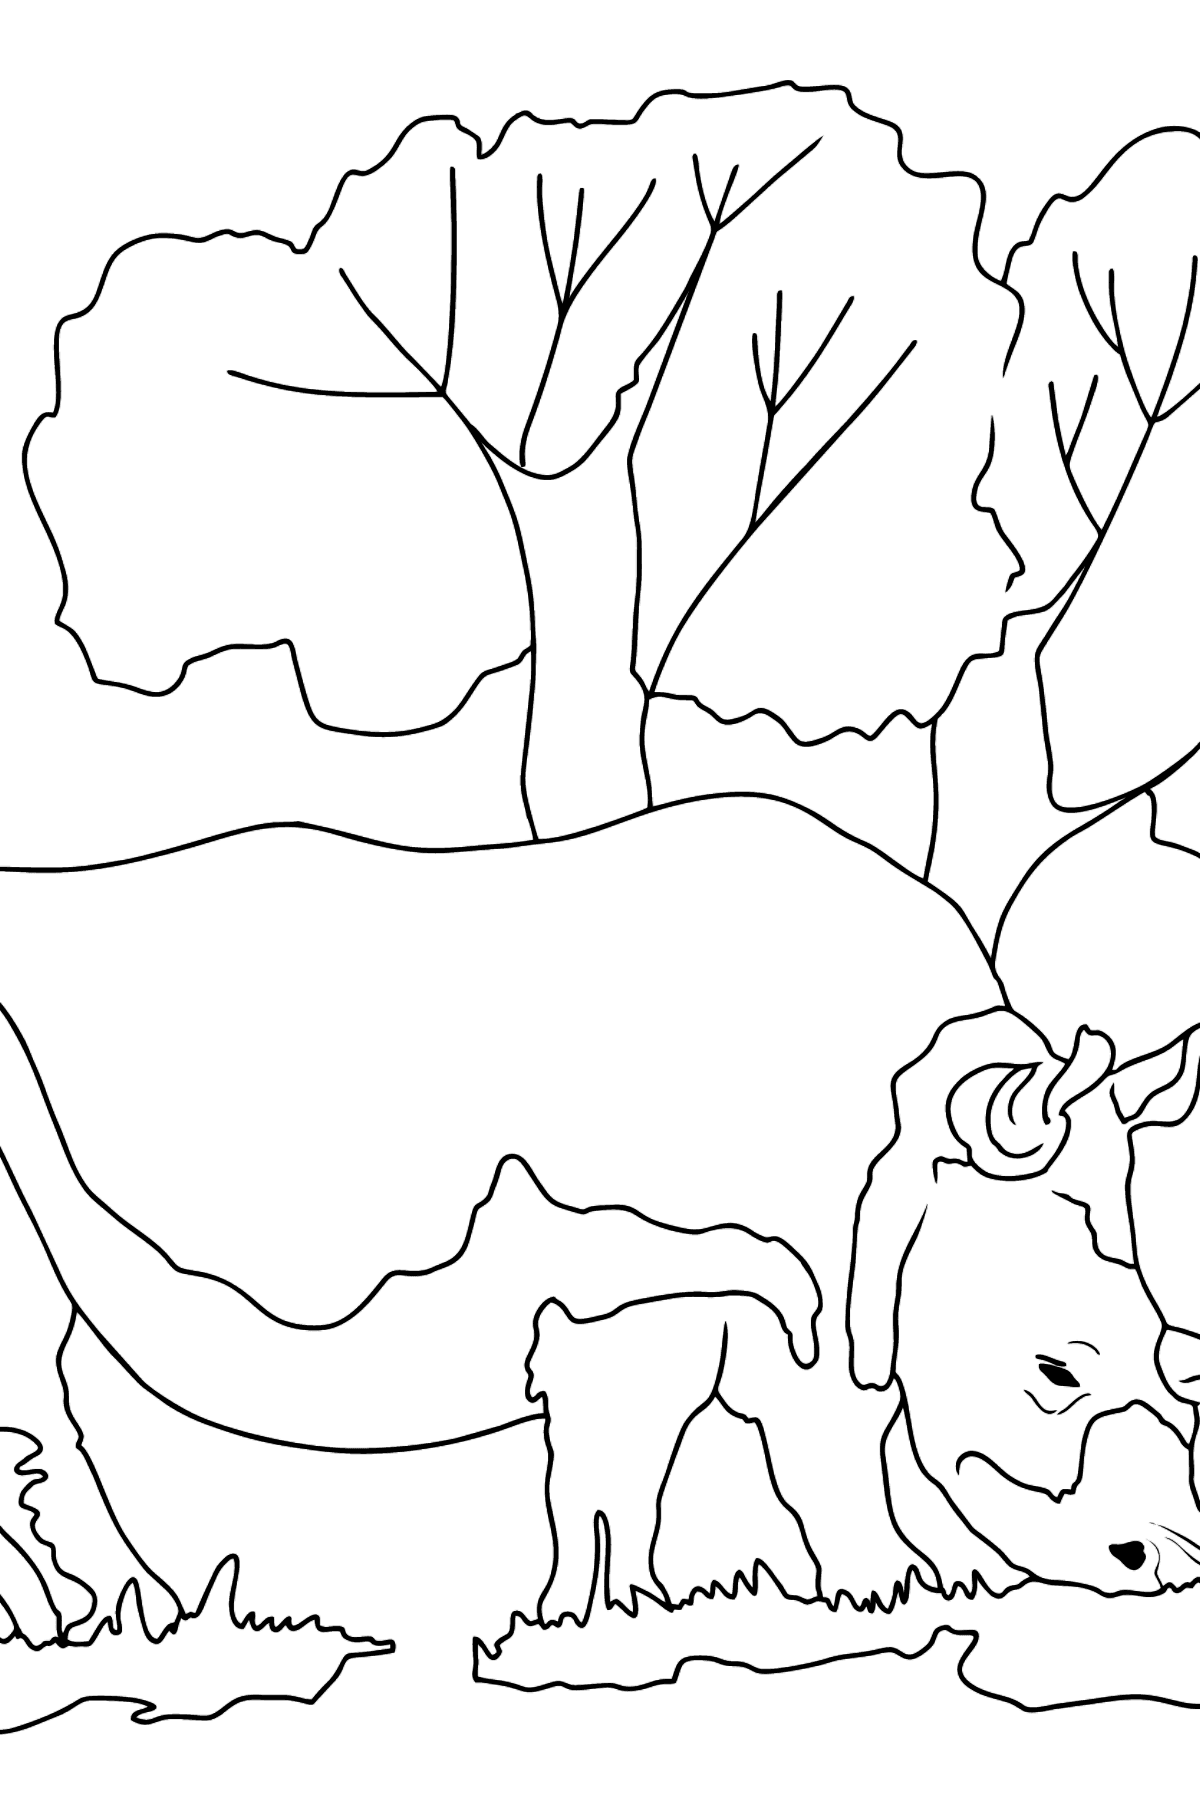 Coloring Page - A Rhino is Eating Grass - Coloring Pages for Kids